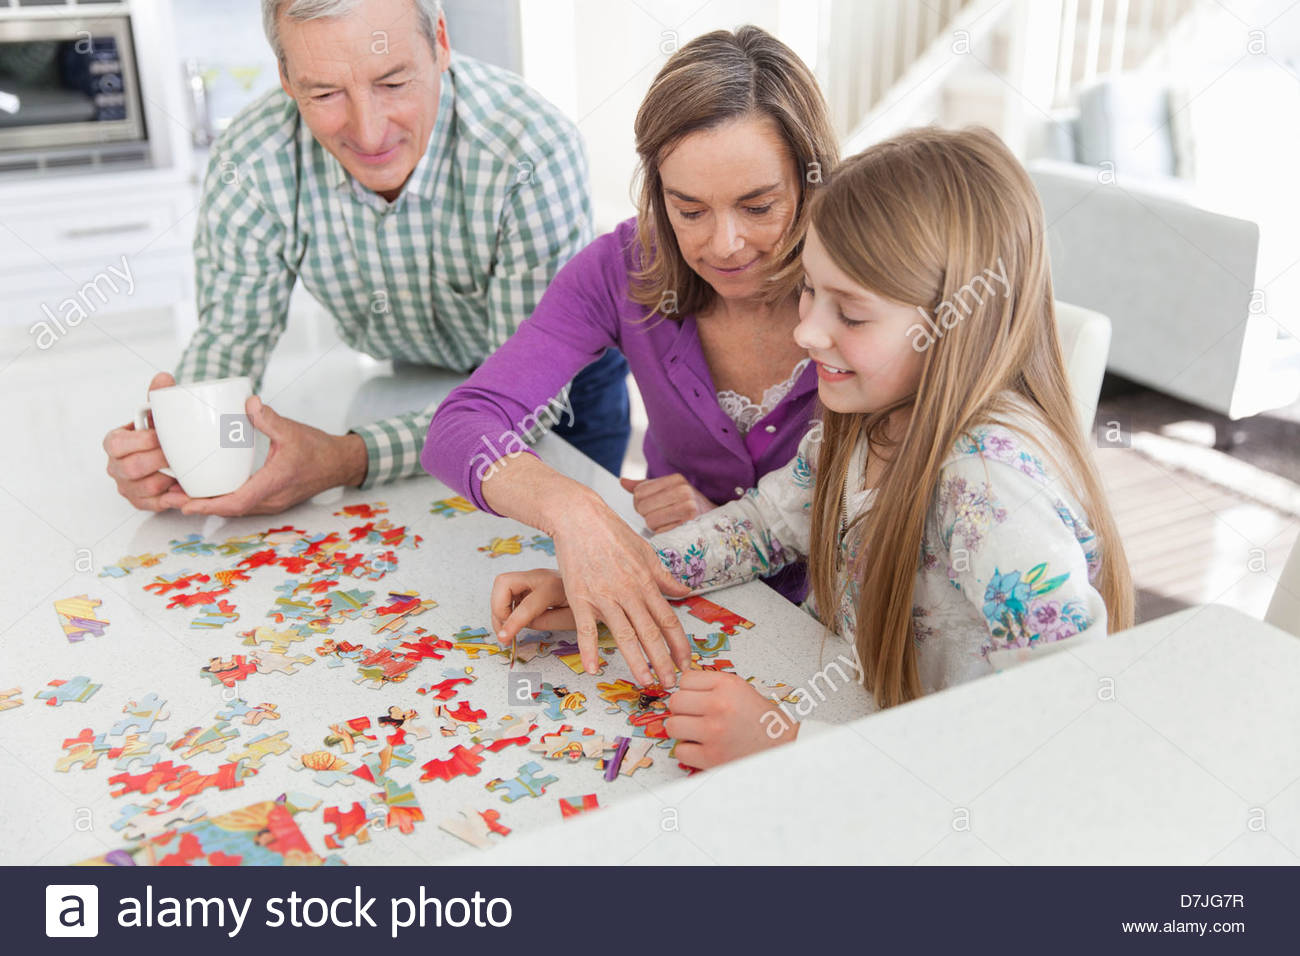 Granddaughter doing jigsaw puzzle with grandparents in kitchen Stock Photo